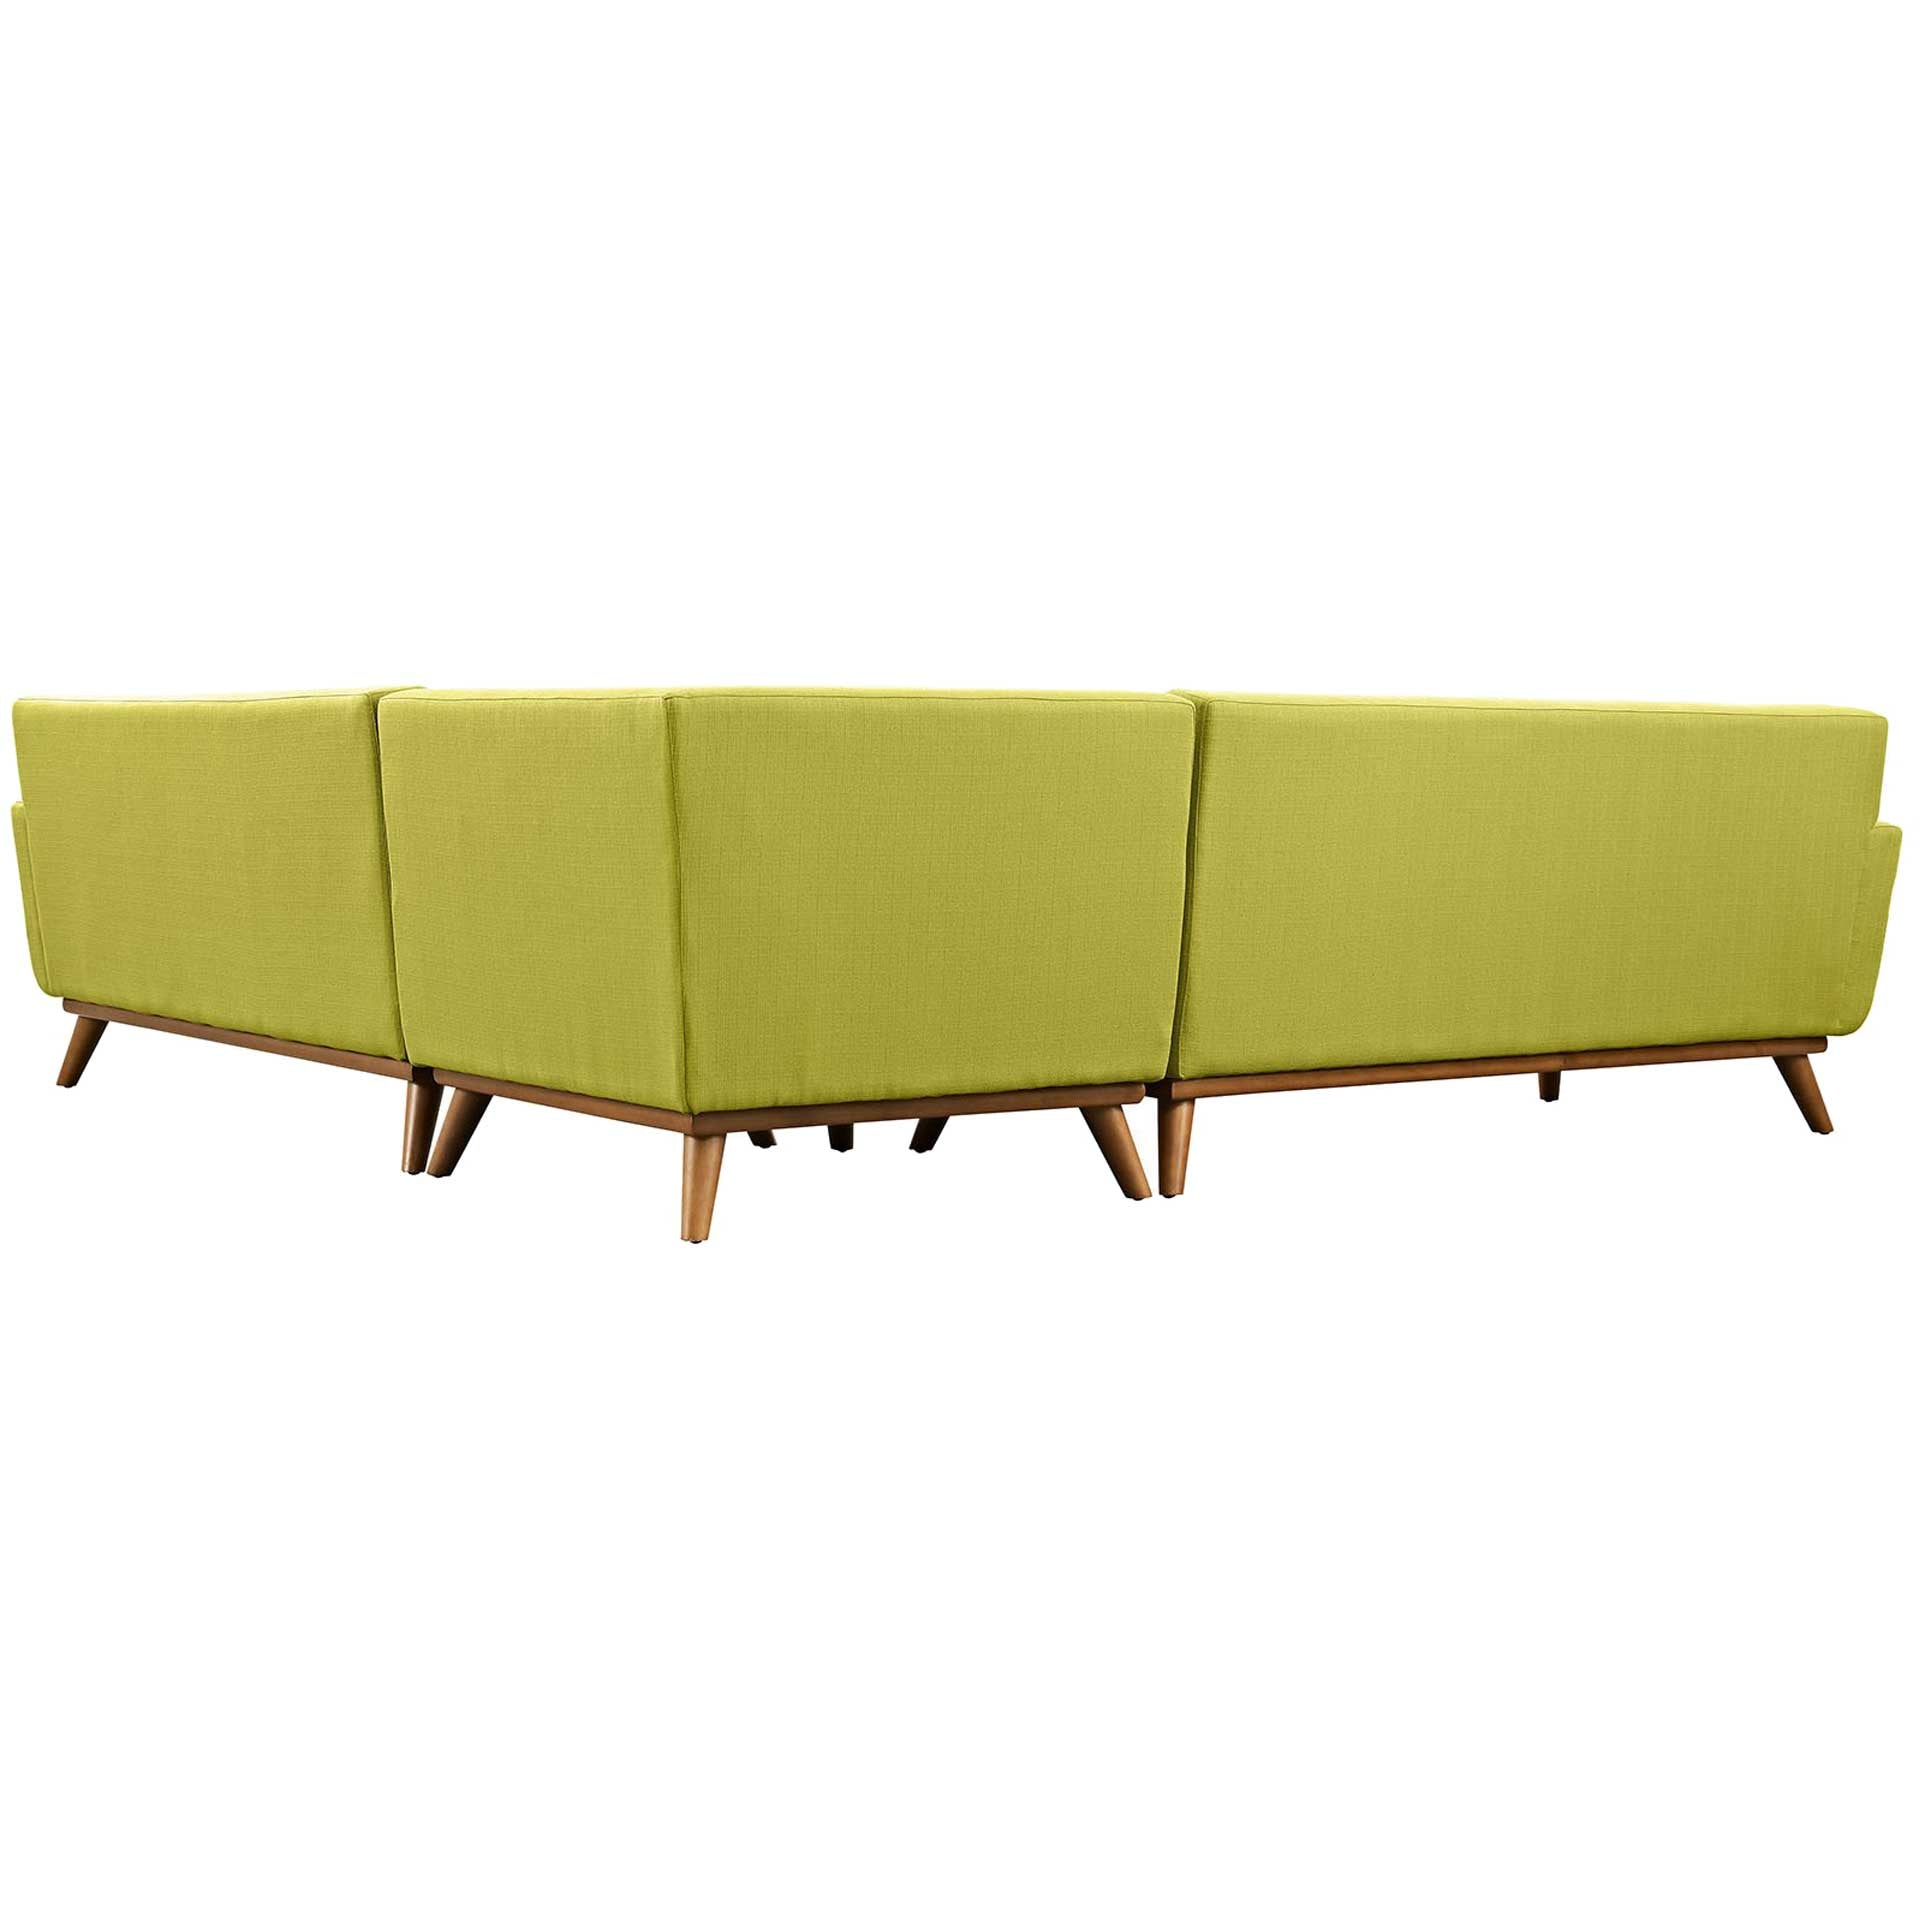 Emory L-Shaped Sectional Sofa Wheat